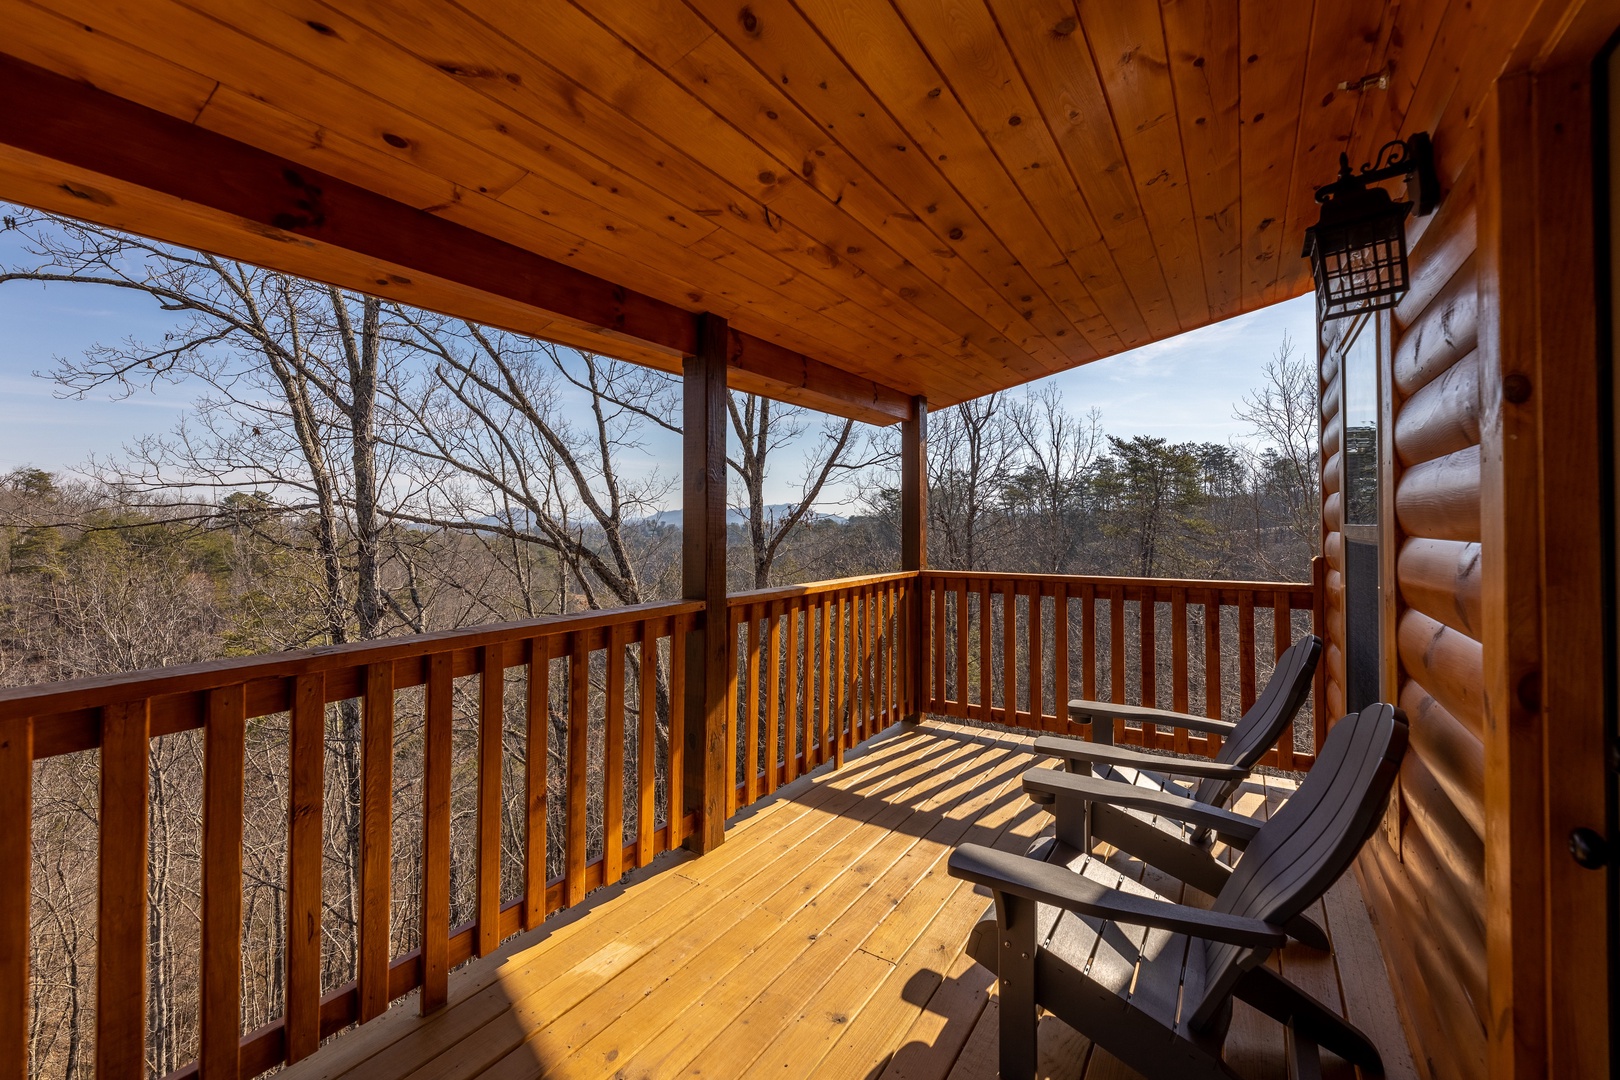 Chairs looking at the mountain view at Everly's Splash, a 4 bedroom cabin rental located in Pigeon Forge